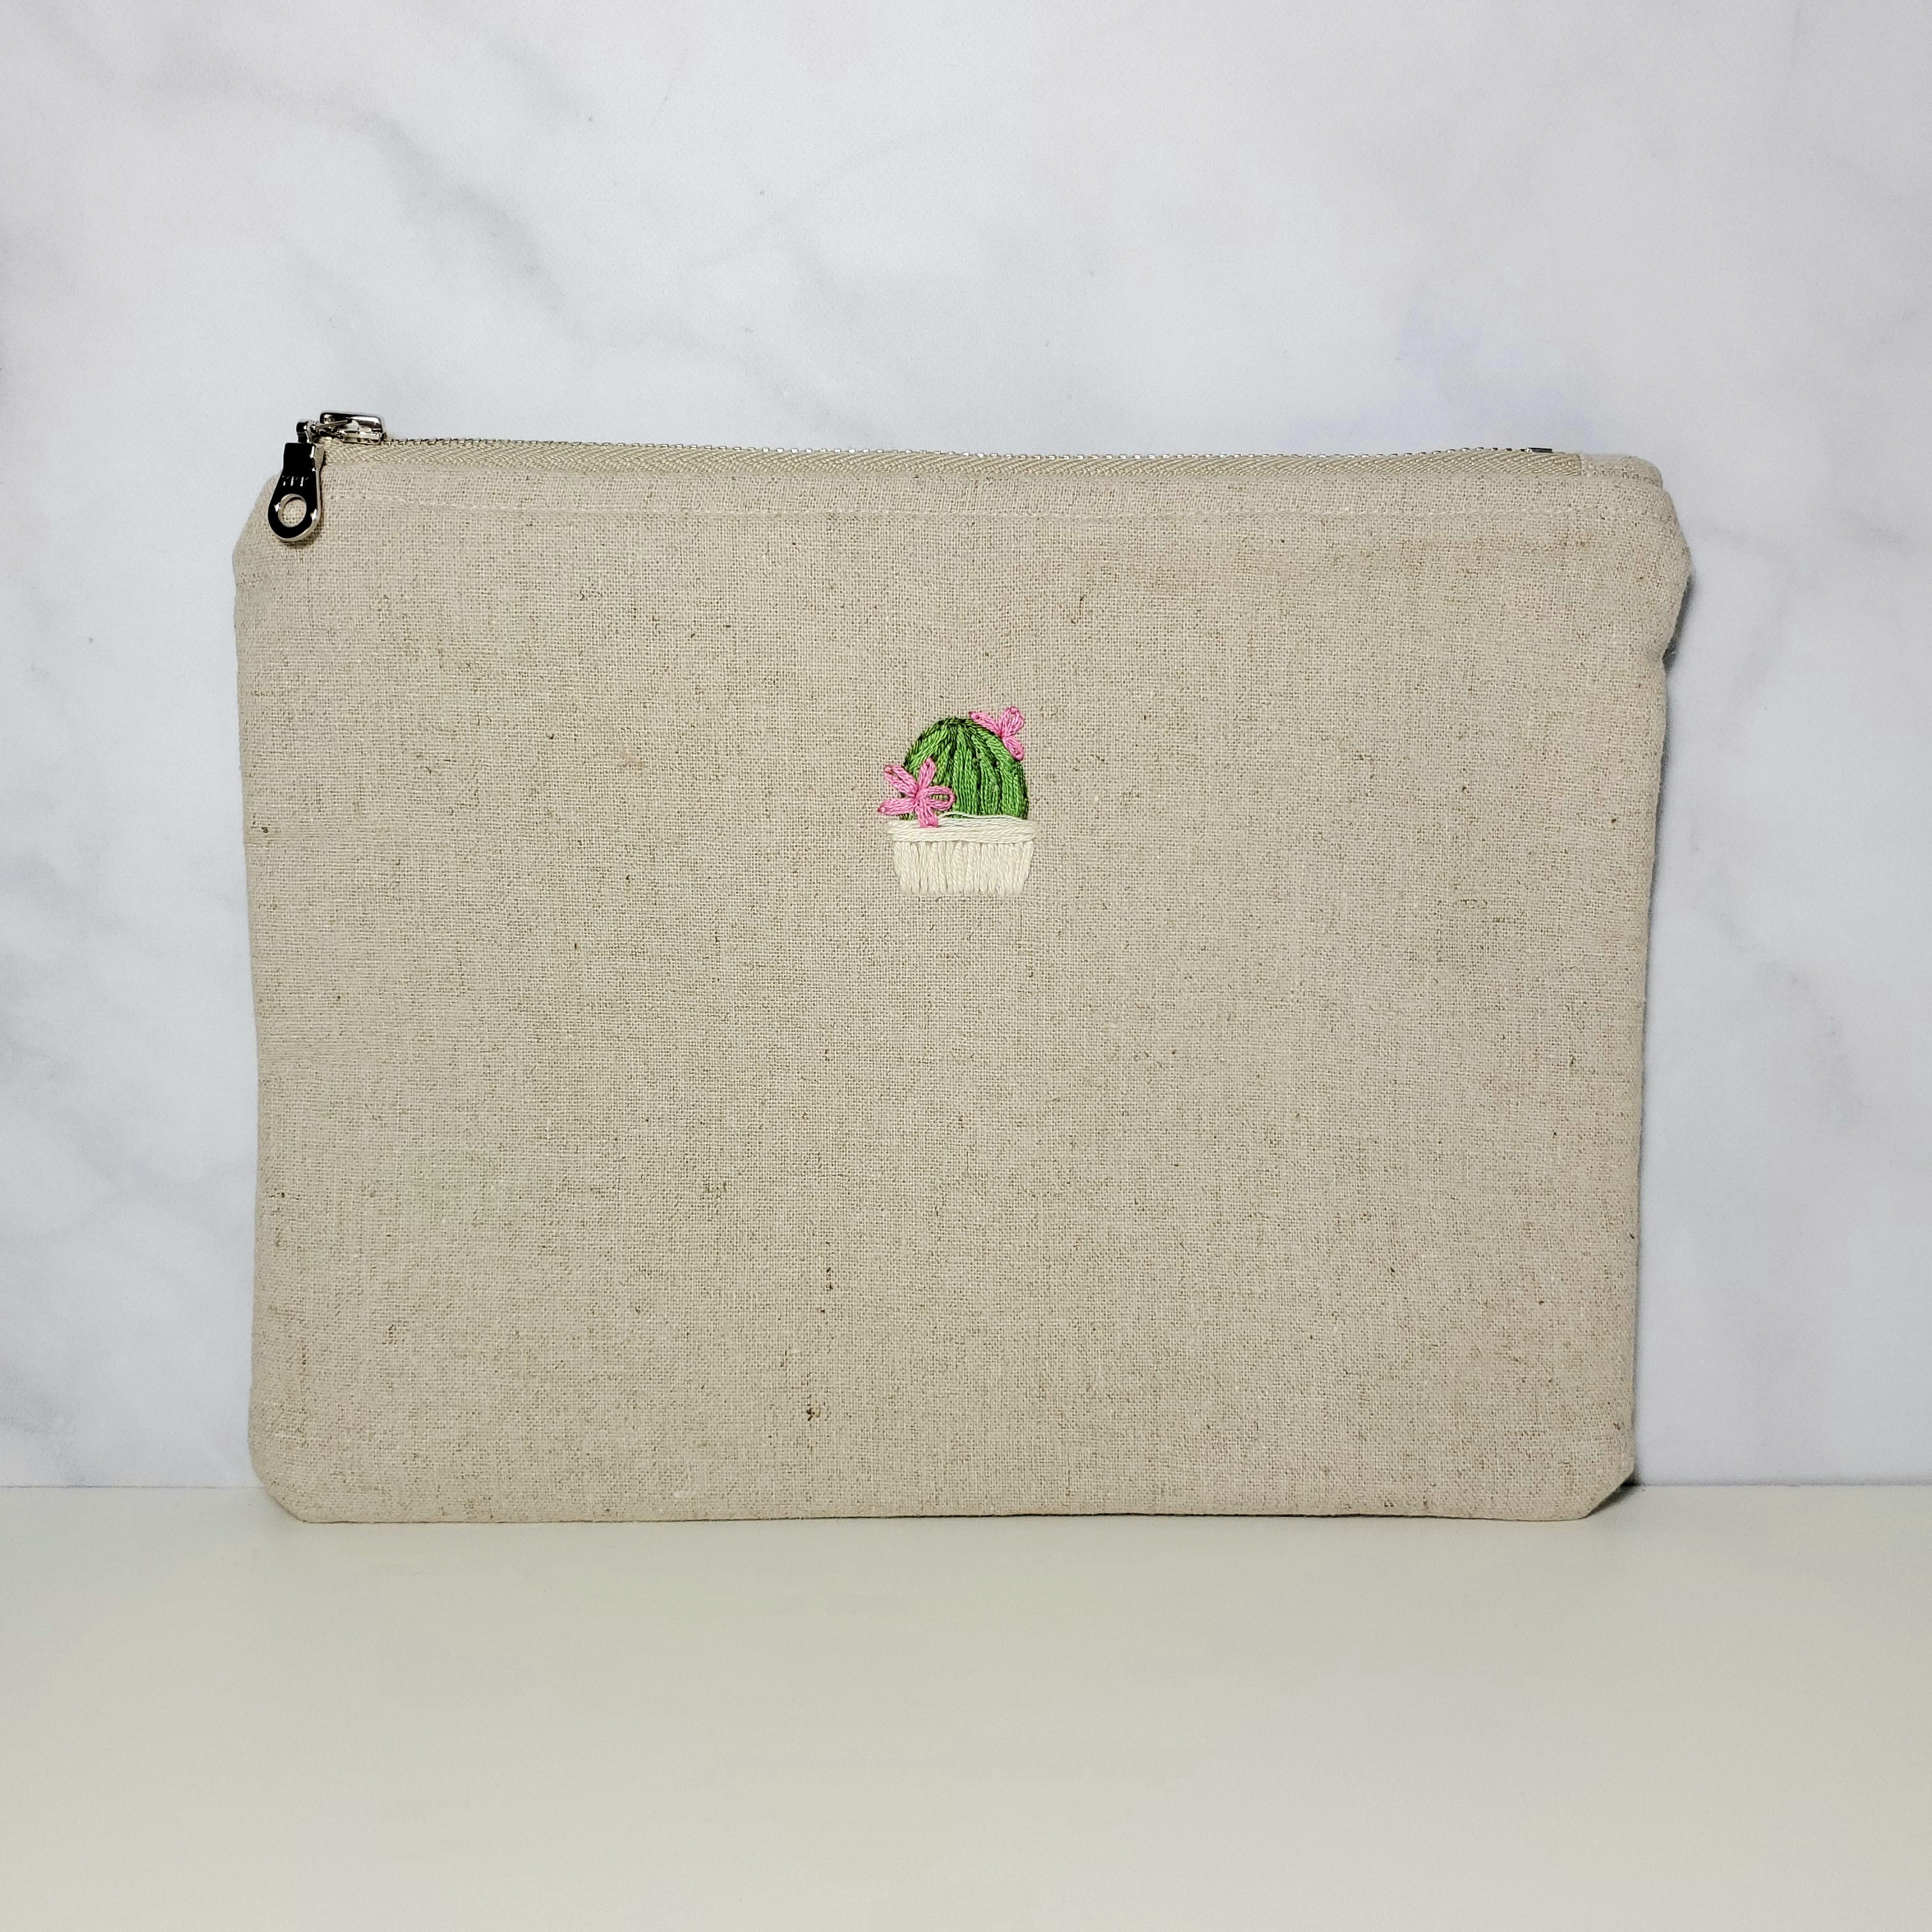 Hand Embroidered Zipper Pouch - Cactus (B)